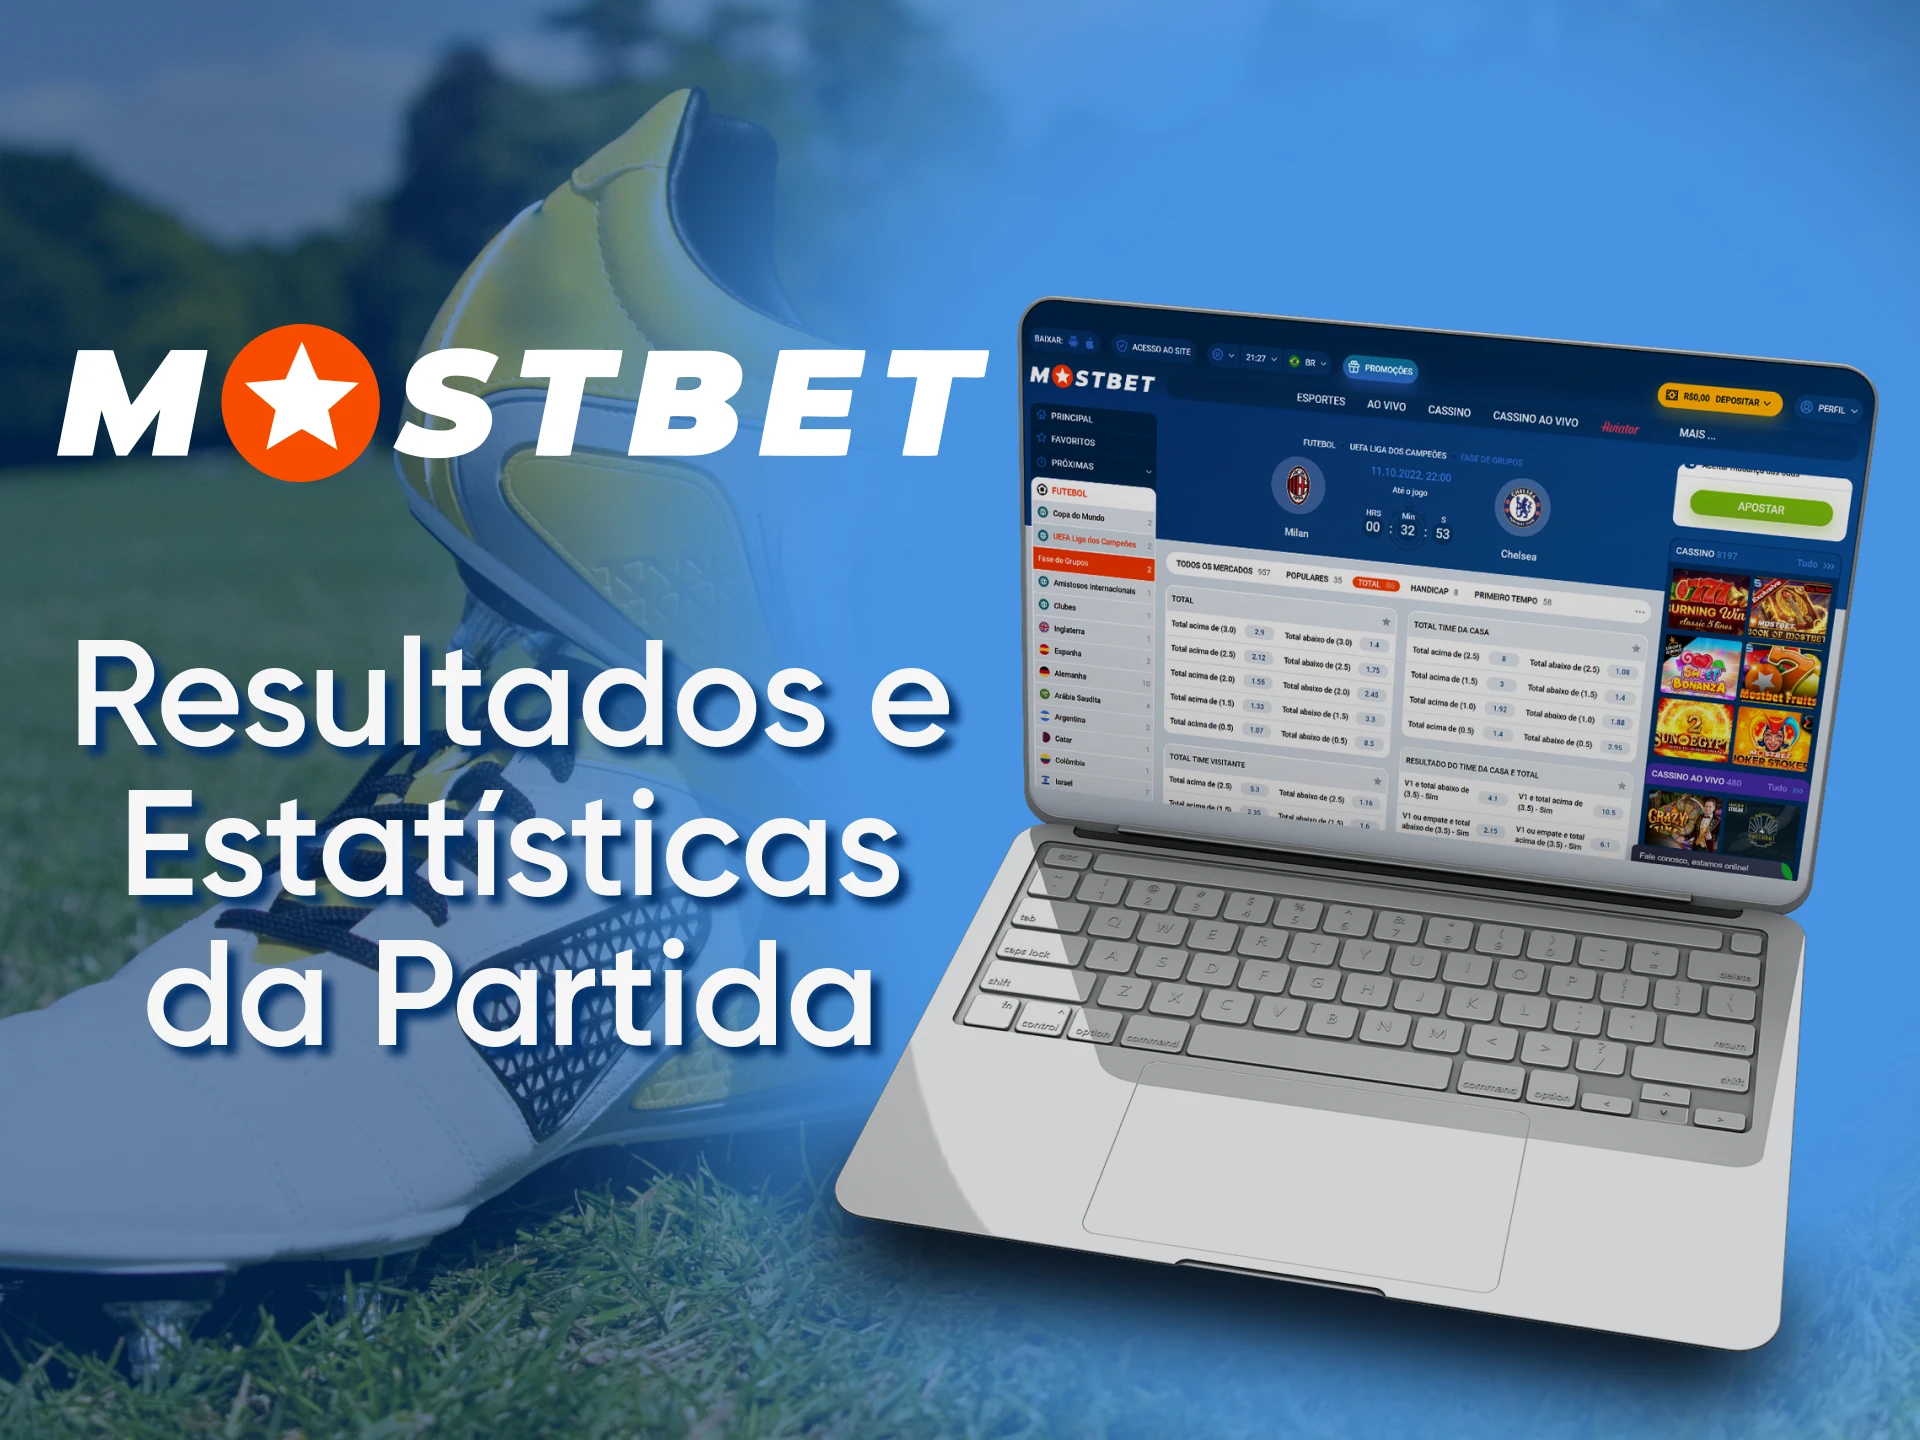 Study the statistics at Mostbet and better predict your bets.